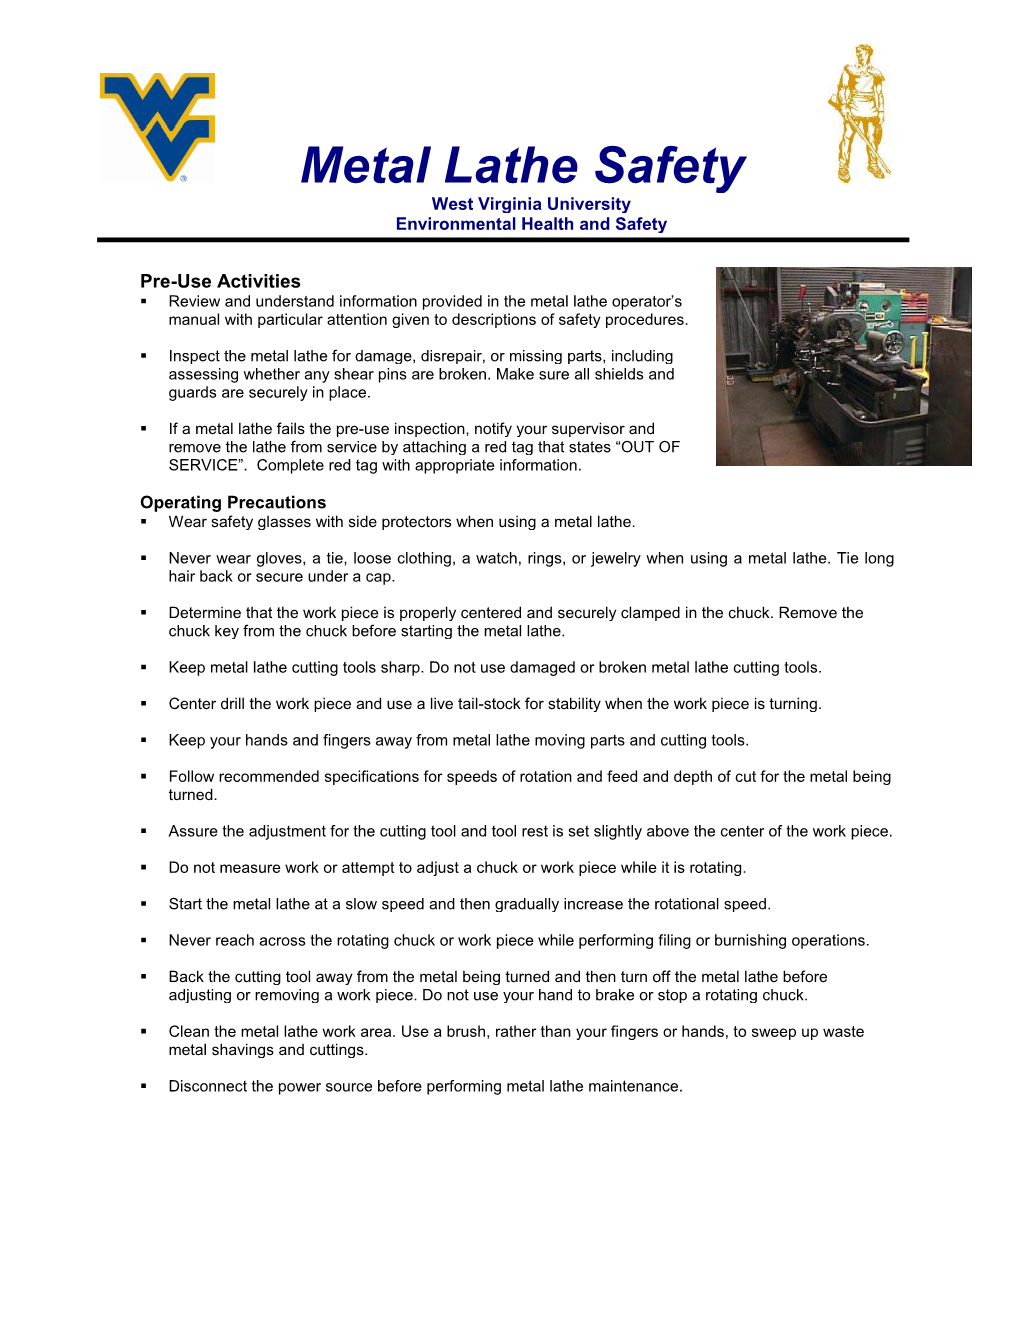 Metal Lathe Safety West Virginia University Environmental Health and Safety